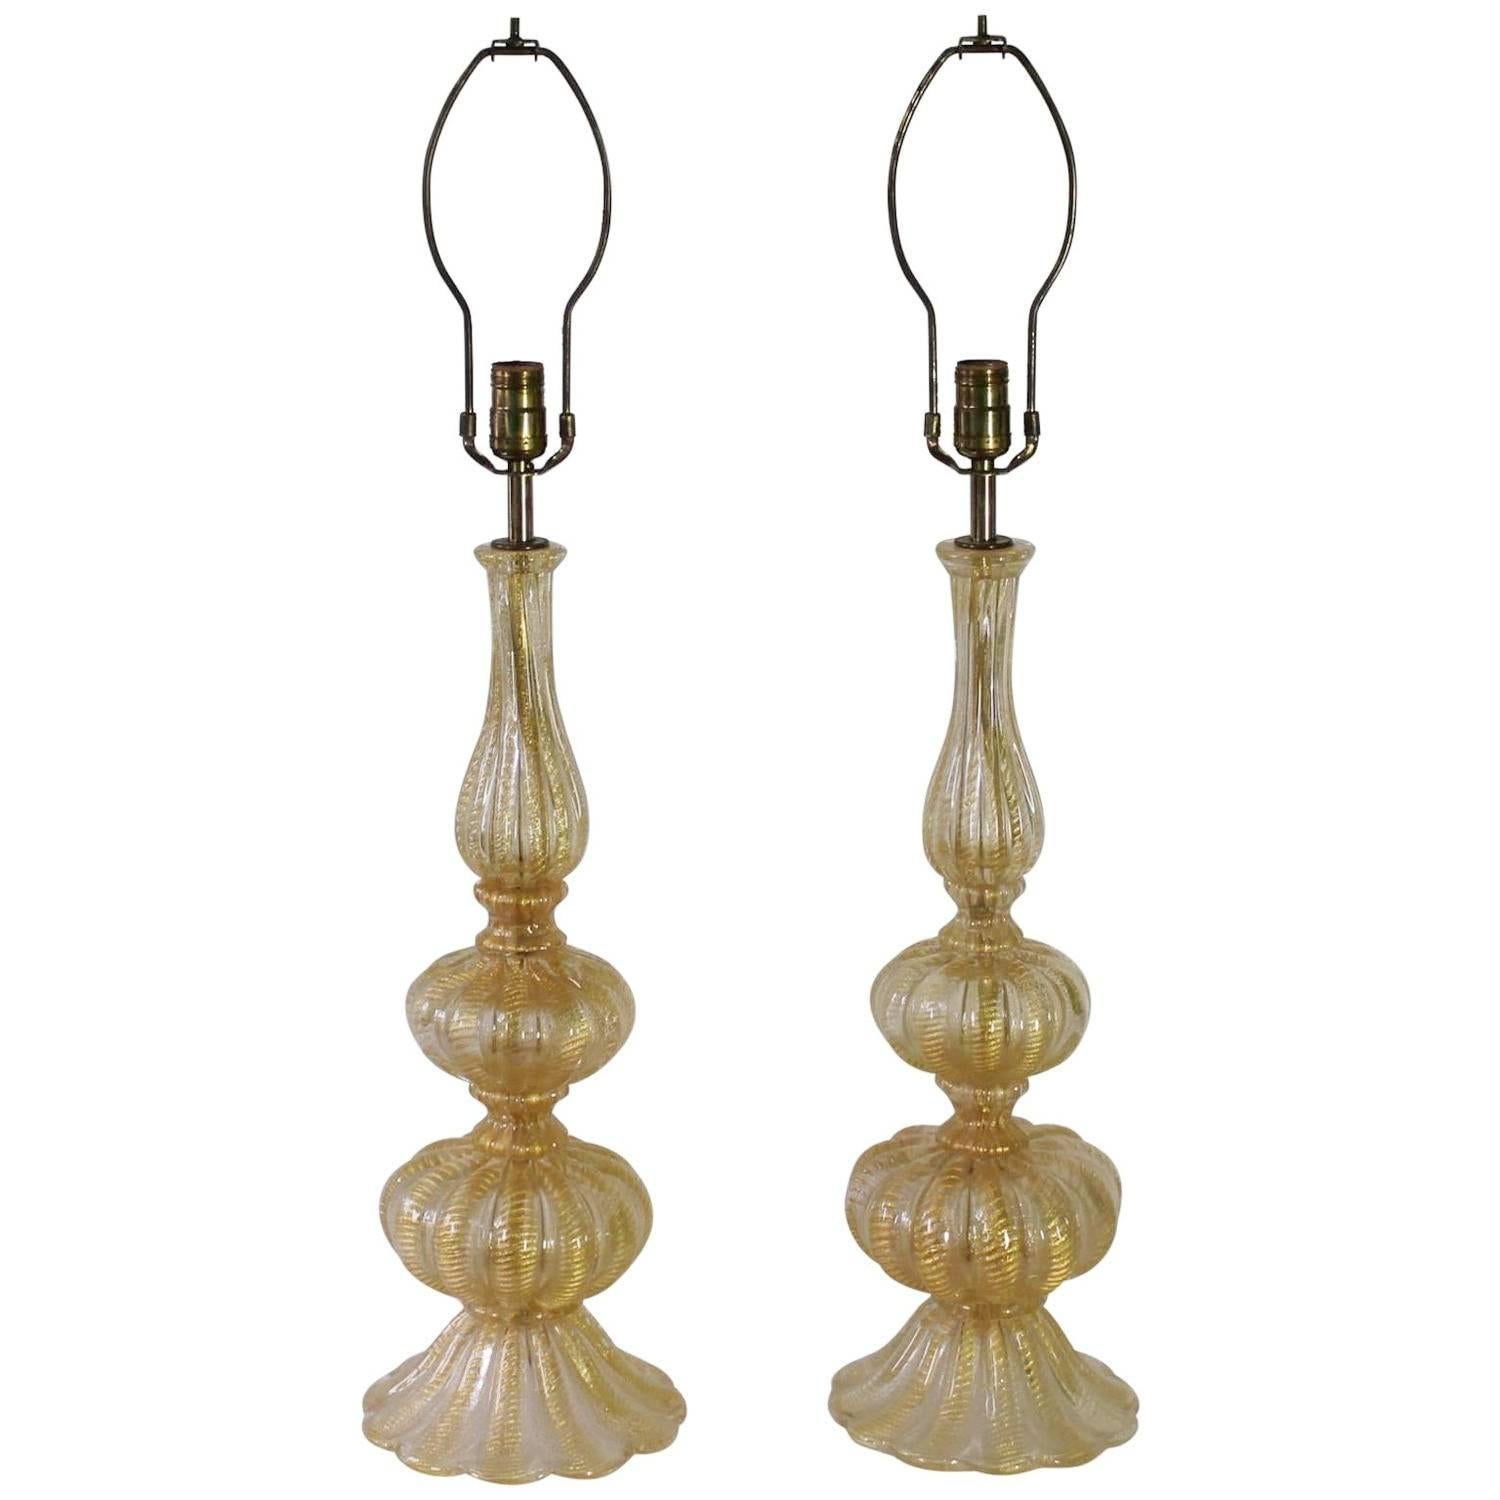 Midcentury Pair of Murano Glass Cordonato d'oro Table Lamps by Barovier & Toso